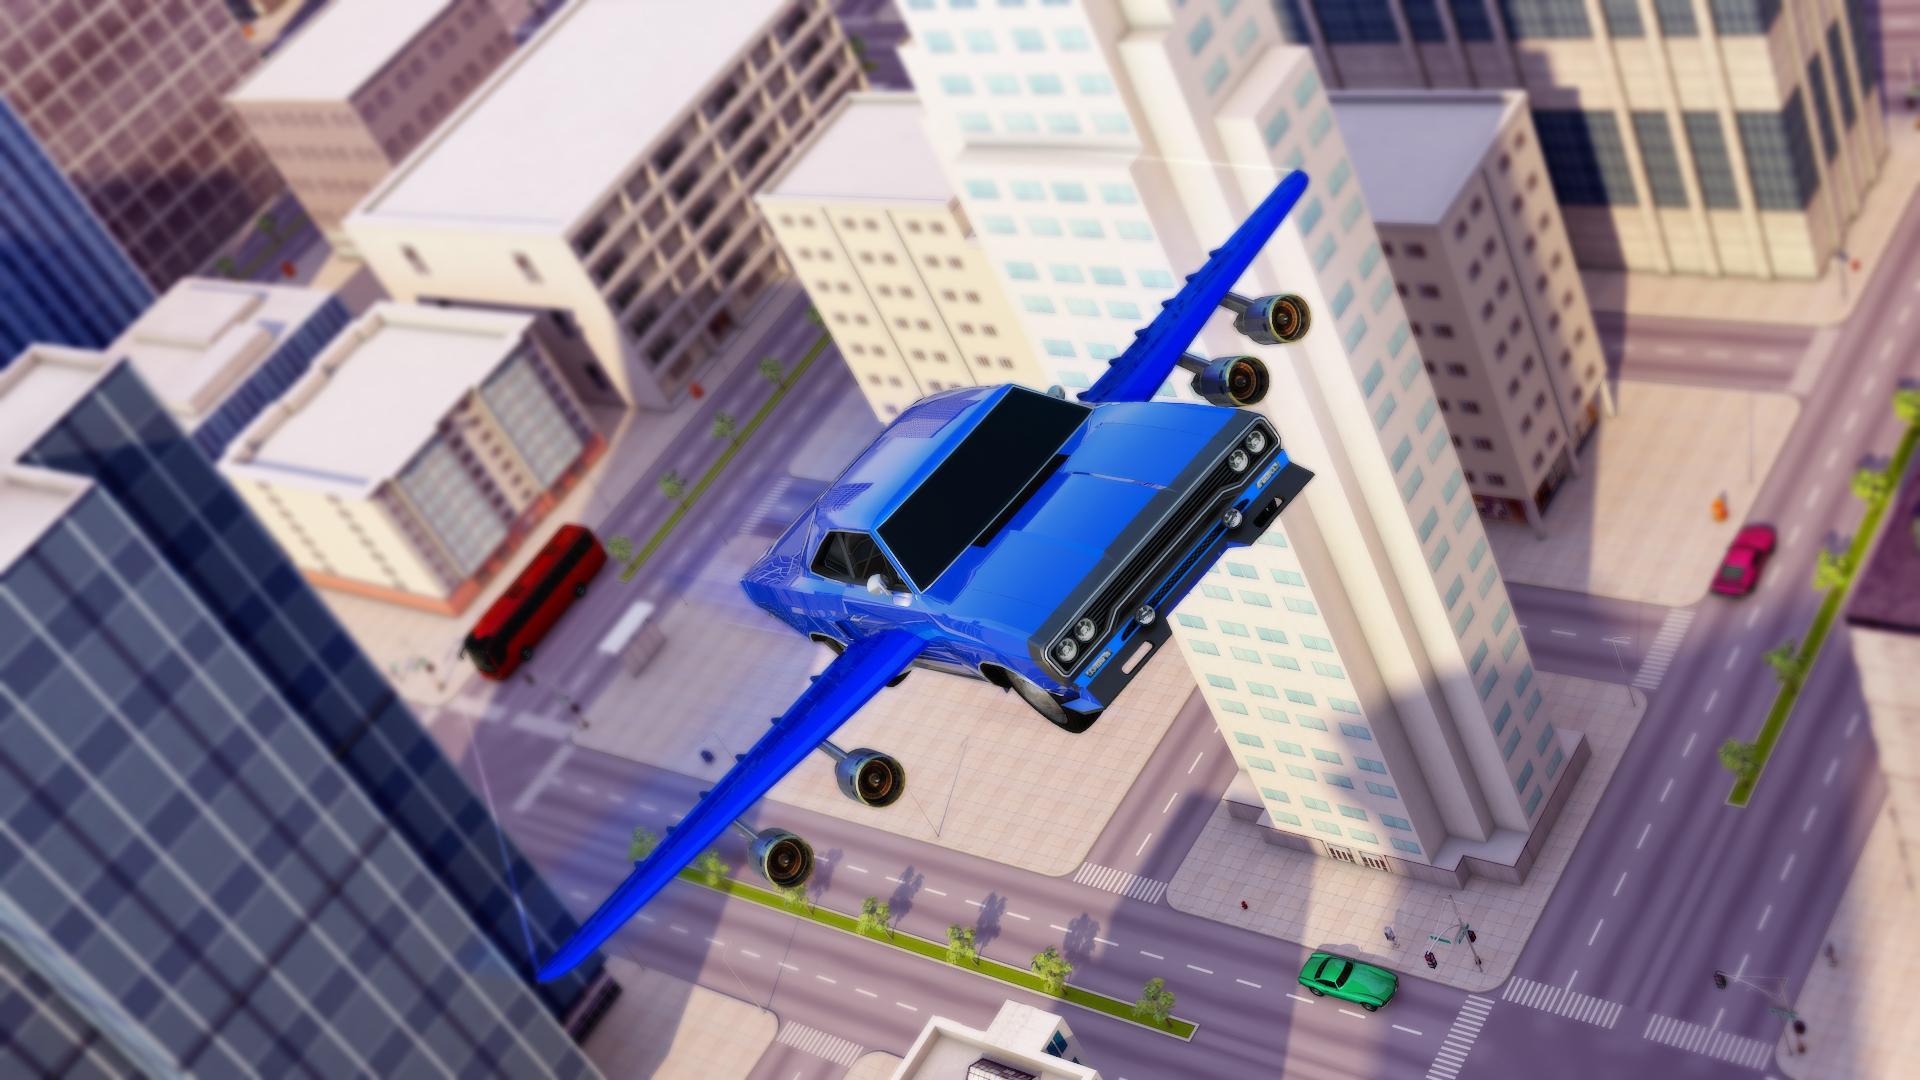 Us Flying Car Driving Simulator 2019 For Android Apk Download - categorylimited edition cars roblox vehicle simulator